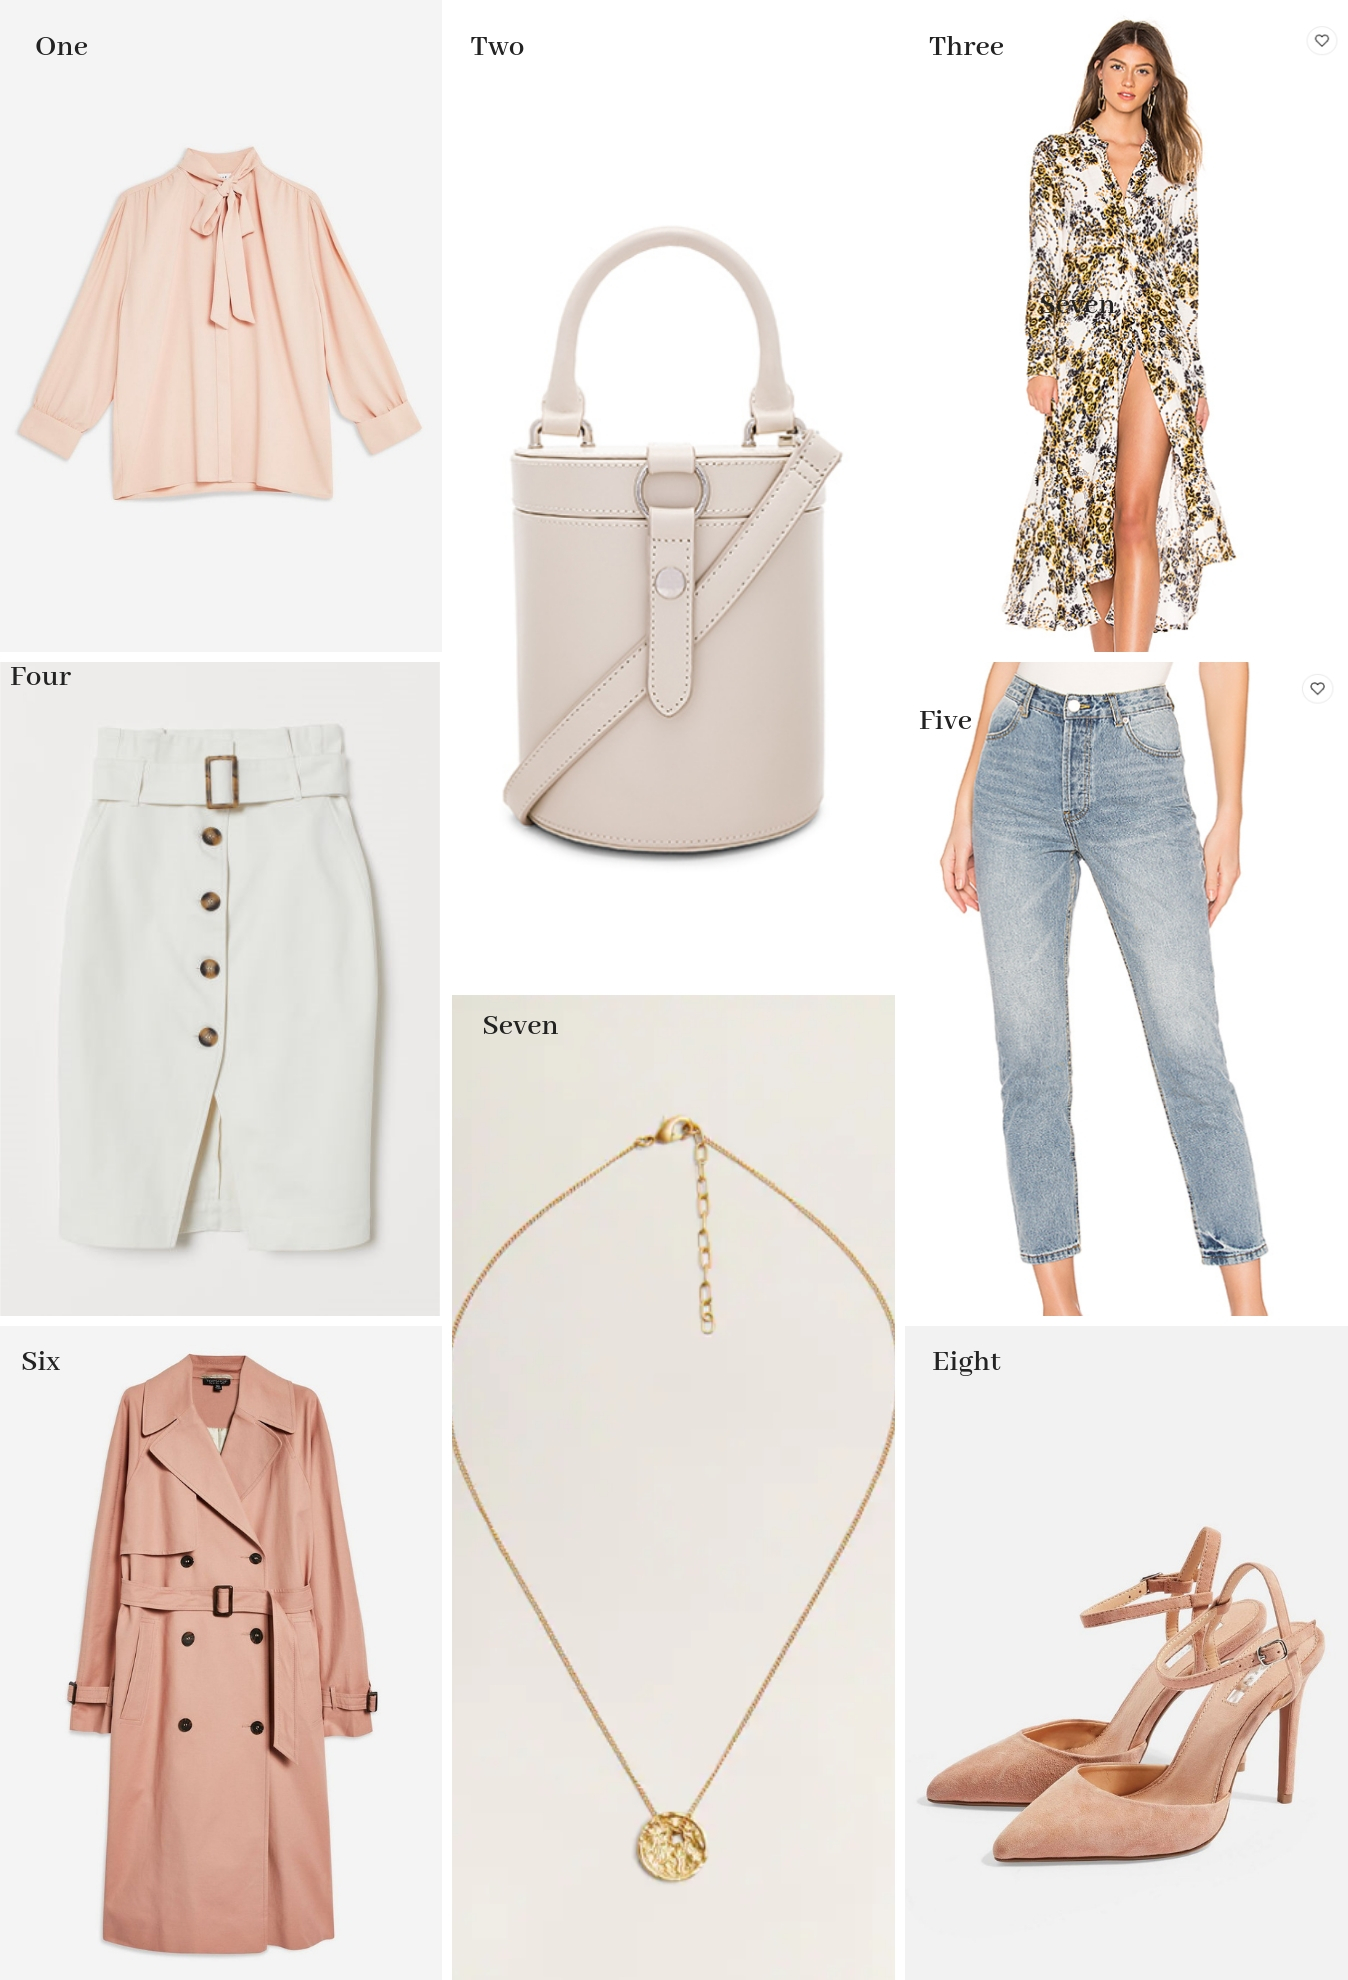 Top 8 Affordable And Stylish Finds: March 2019 - Mama In Heels